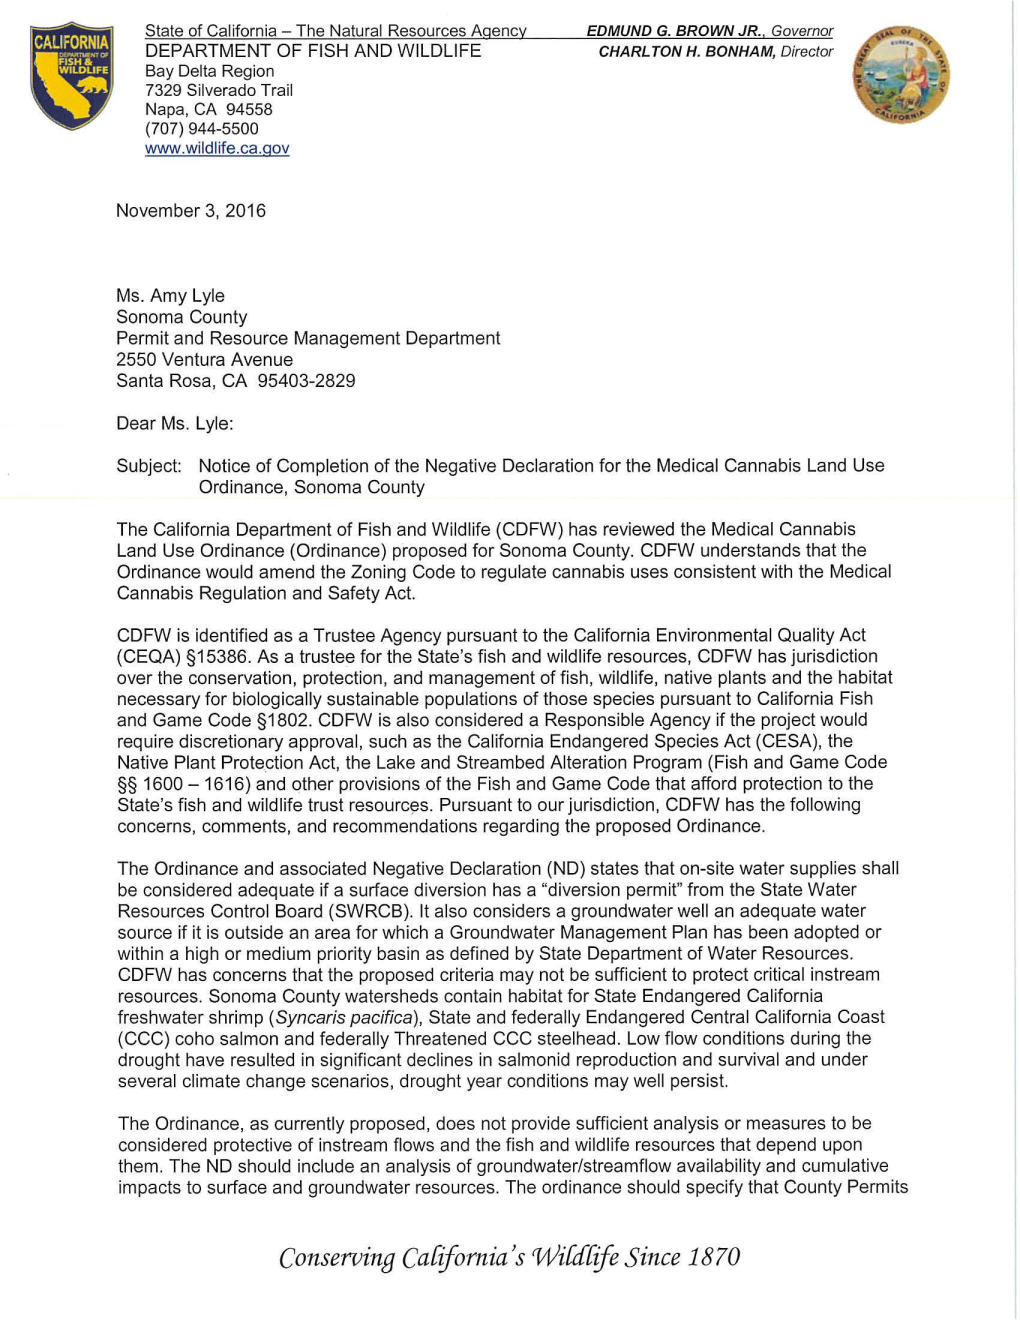 Letter from California Department of Fish and Wildlife RE: Notice of Completion of the Negative Declaration for the Medical Cann